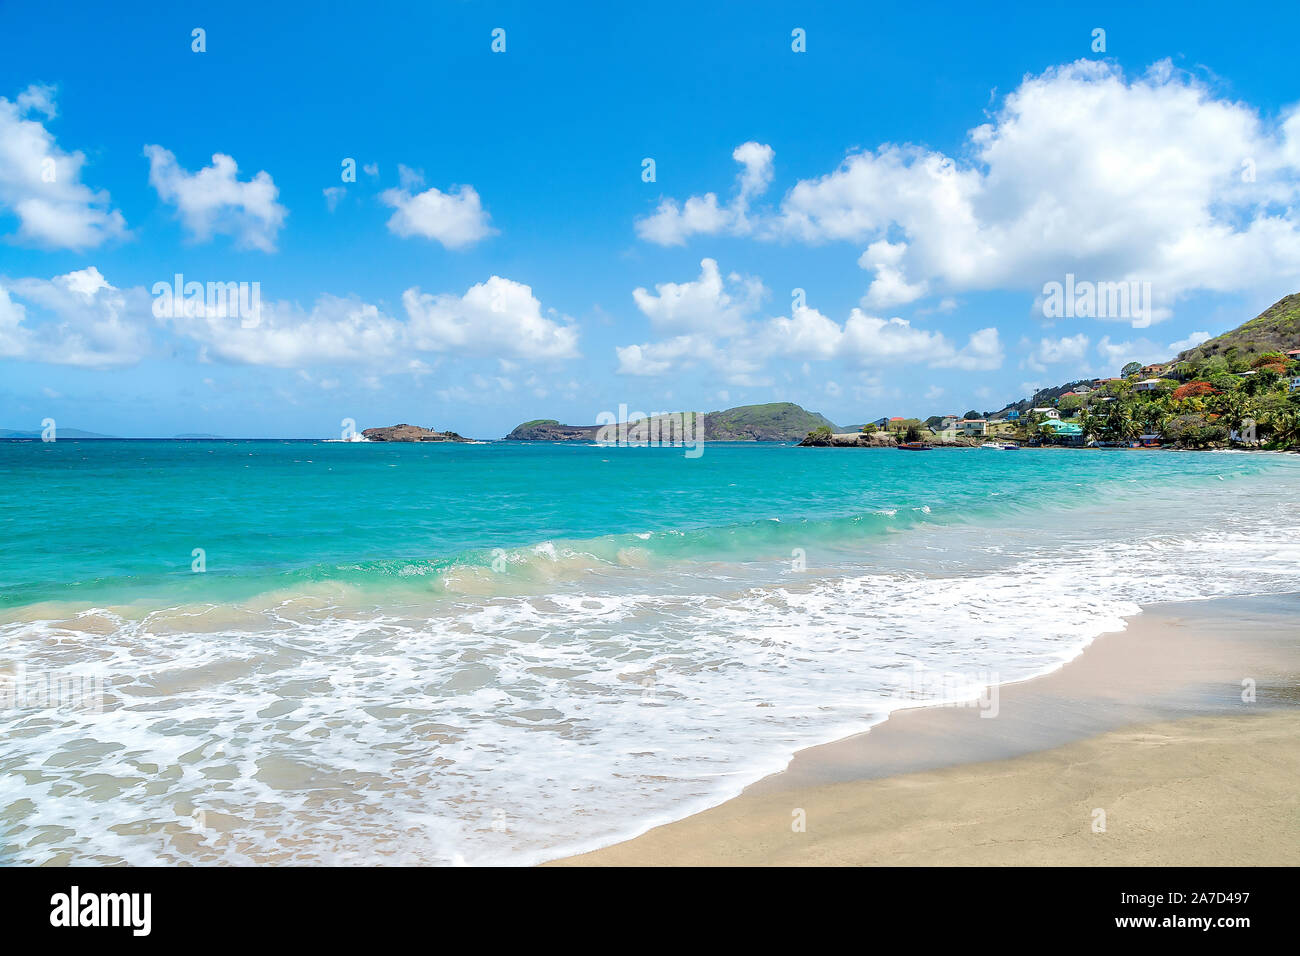 Friendship Bay beach on Bequia island, St Vincent and the Grenadines Stock Photo